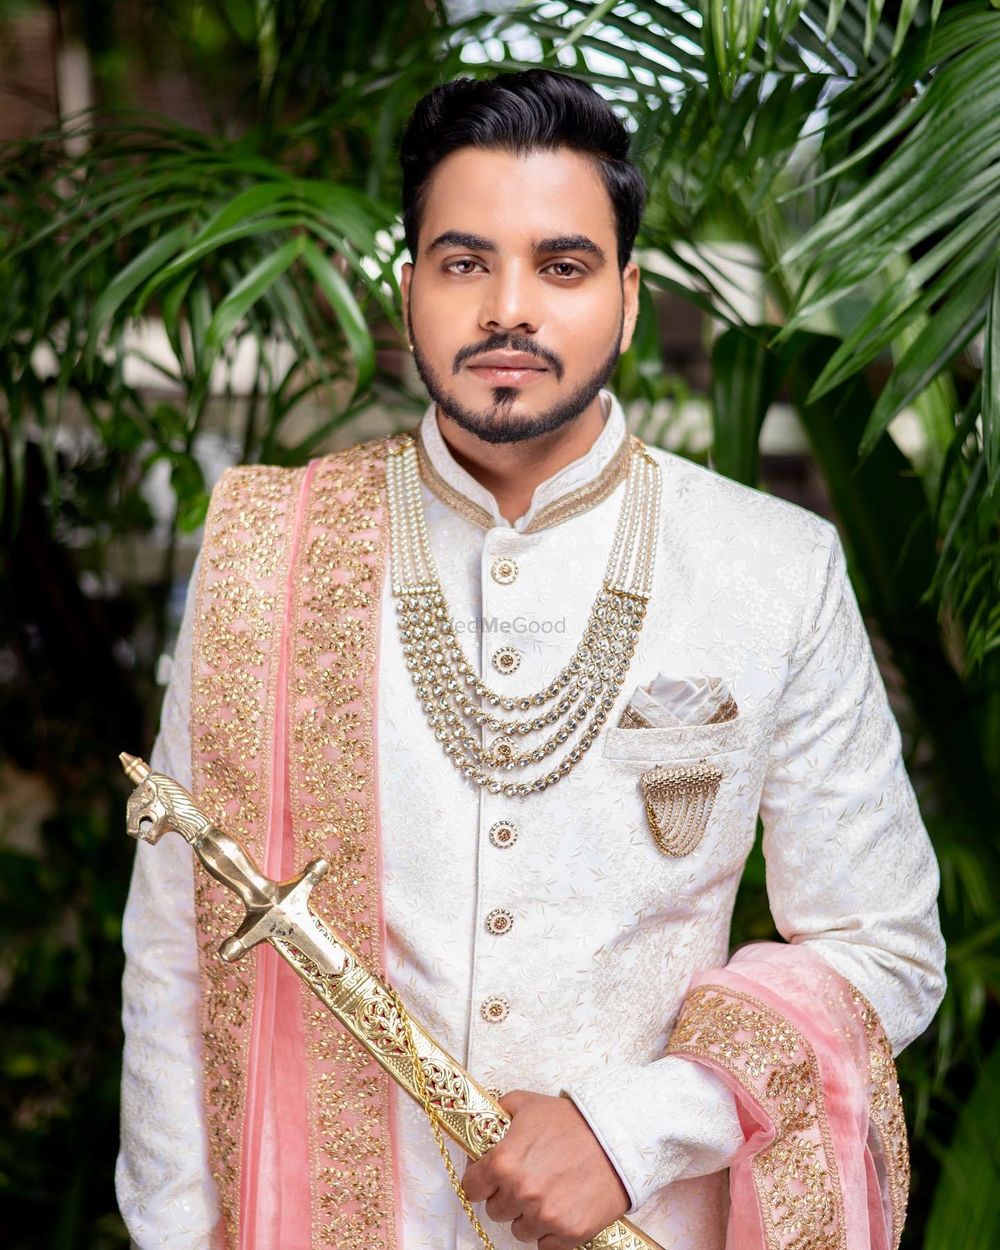 Photo From GROOM MAKEUP - By Bridal Makeup by Bhaavya Kapur